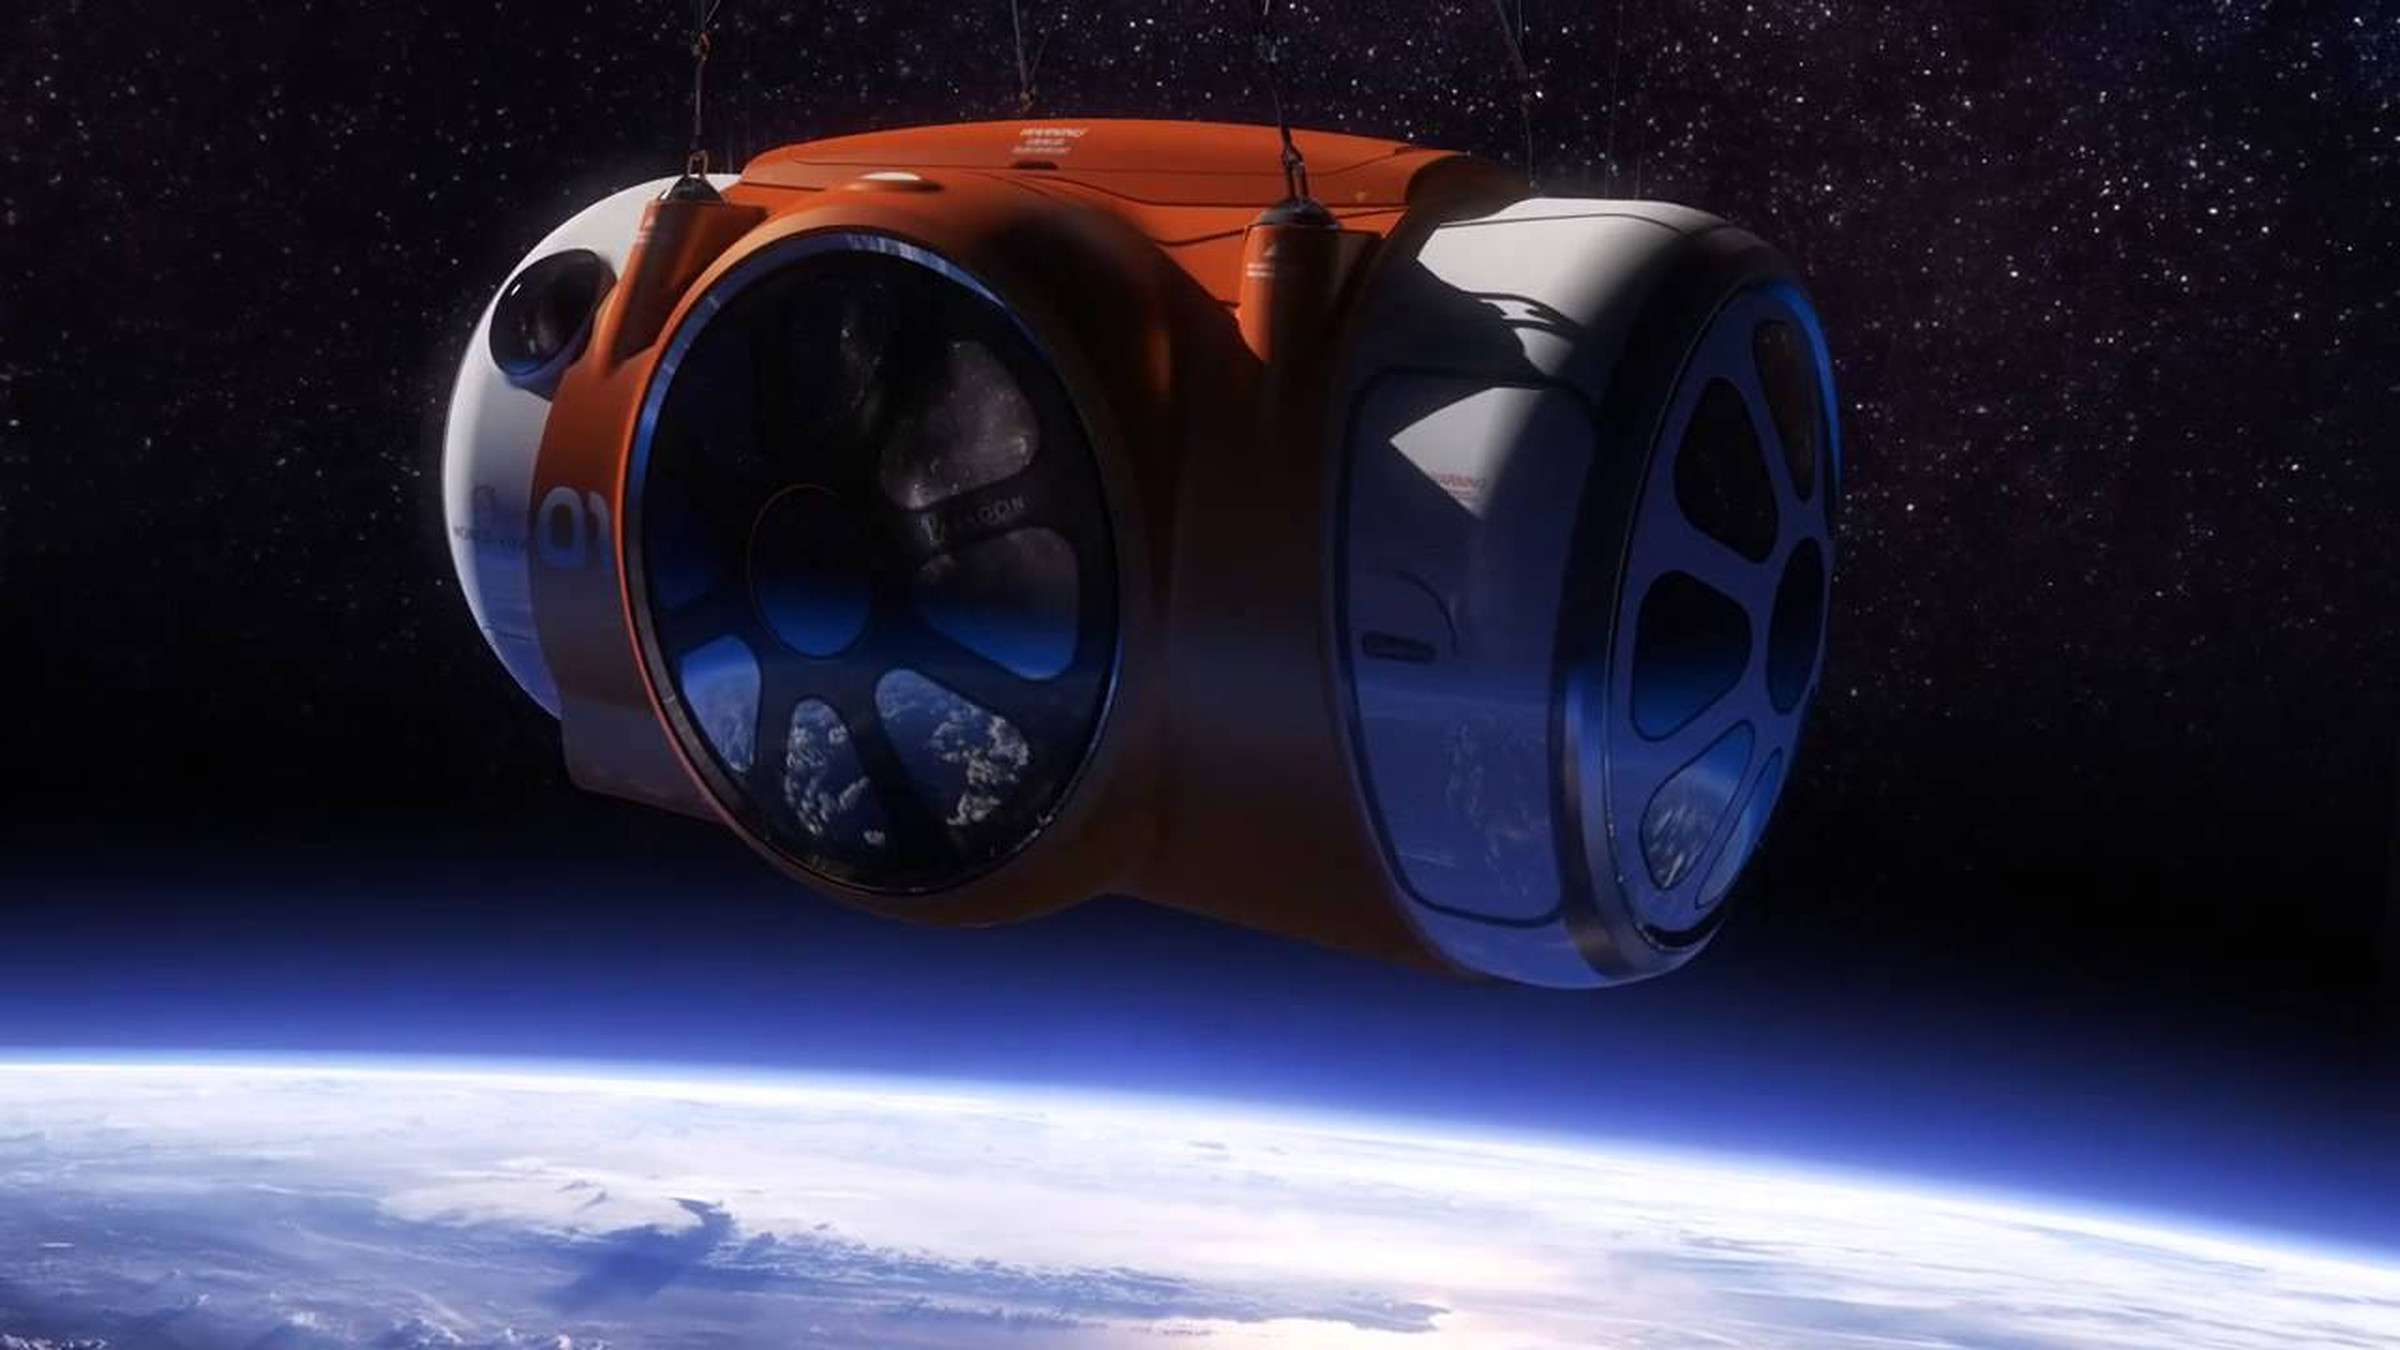 World View’s Voyager will ferry passengers to the edge of space on a Wi-Fi enabled craft.